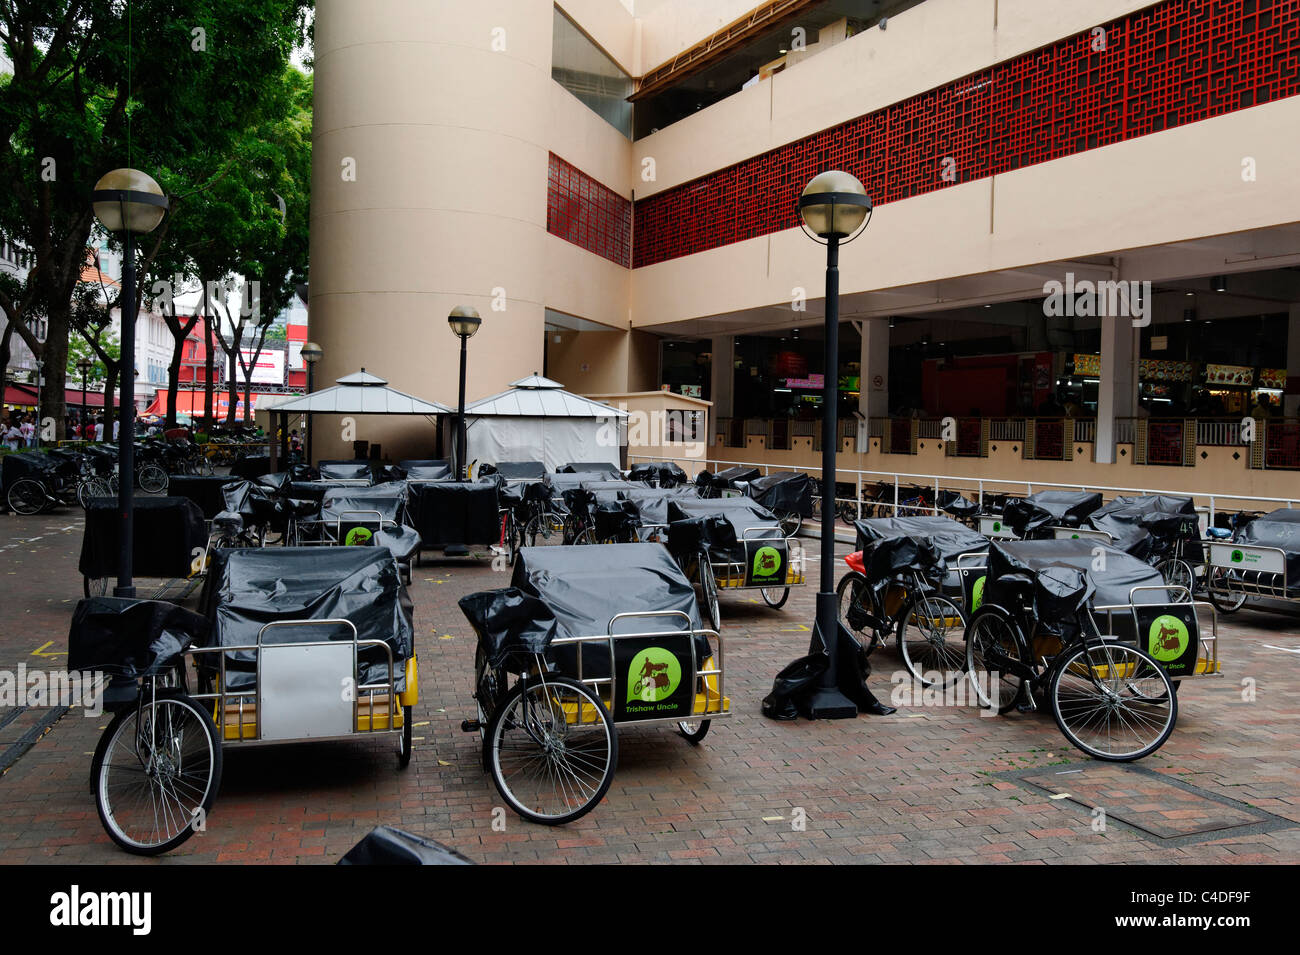 Cycle Rickshaws Parks And Covered At Bugis Junction Singapore Stock Photo Alamy [ 955 x 1300 Pixel ]